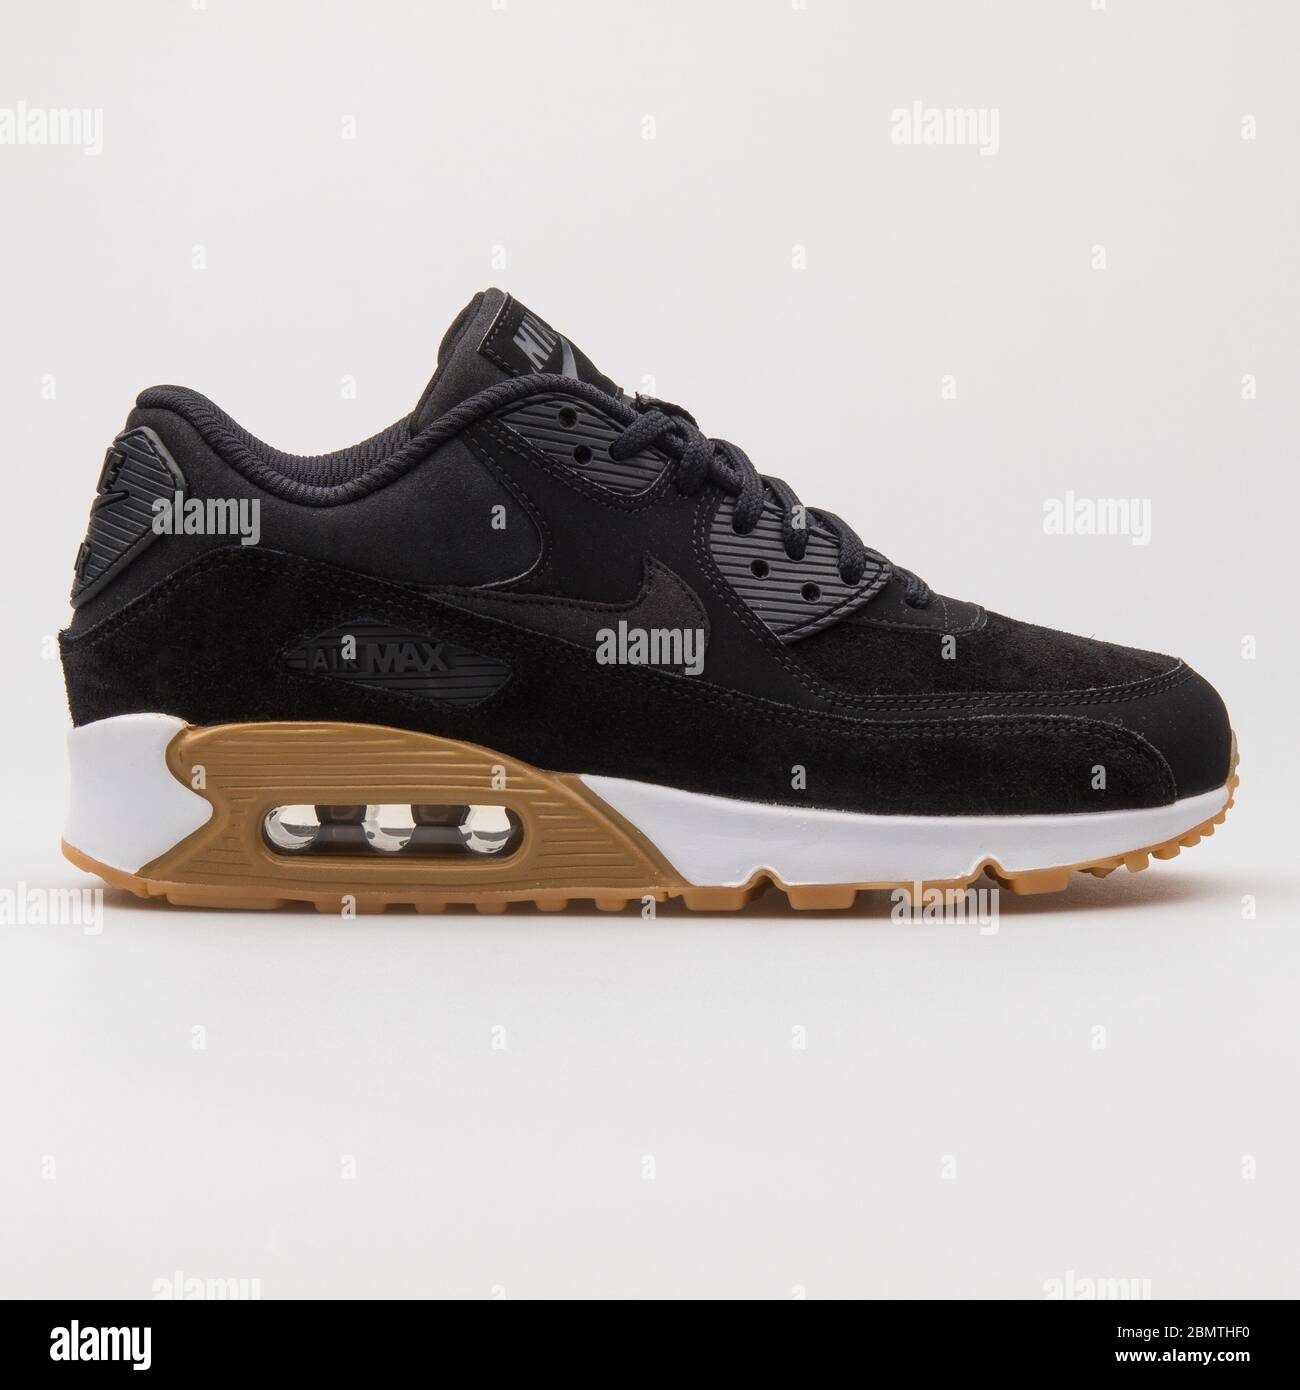 VIENNA, AUSTRIA - JANUARY 12, 2018: Nike Air Max 90 Suede black and brown  sneaker on white background Stock Photo - Alamy